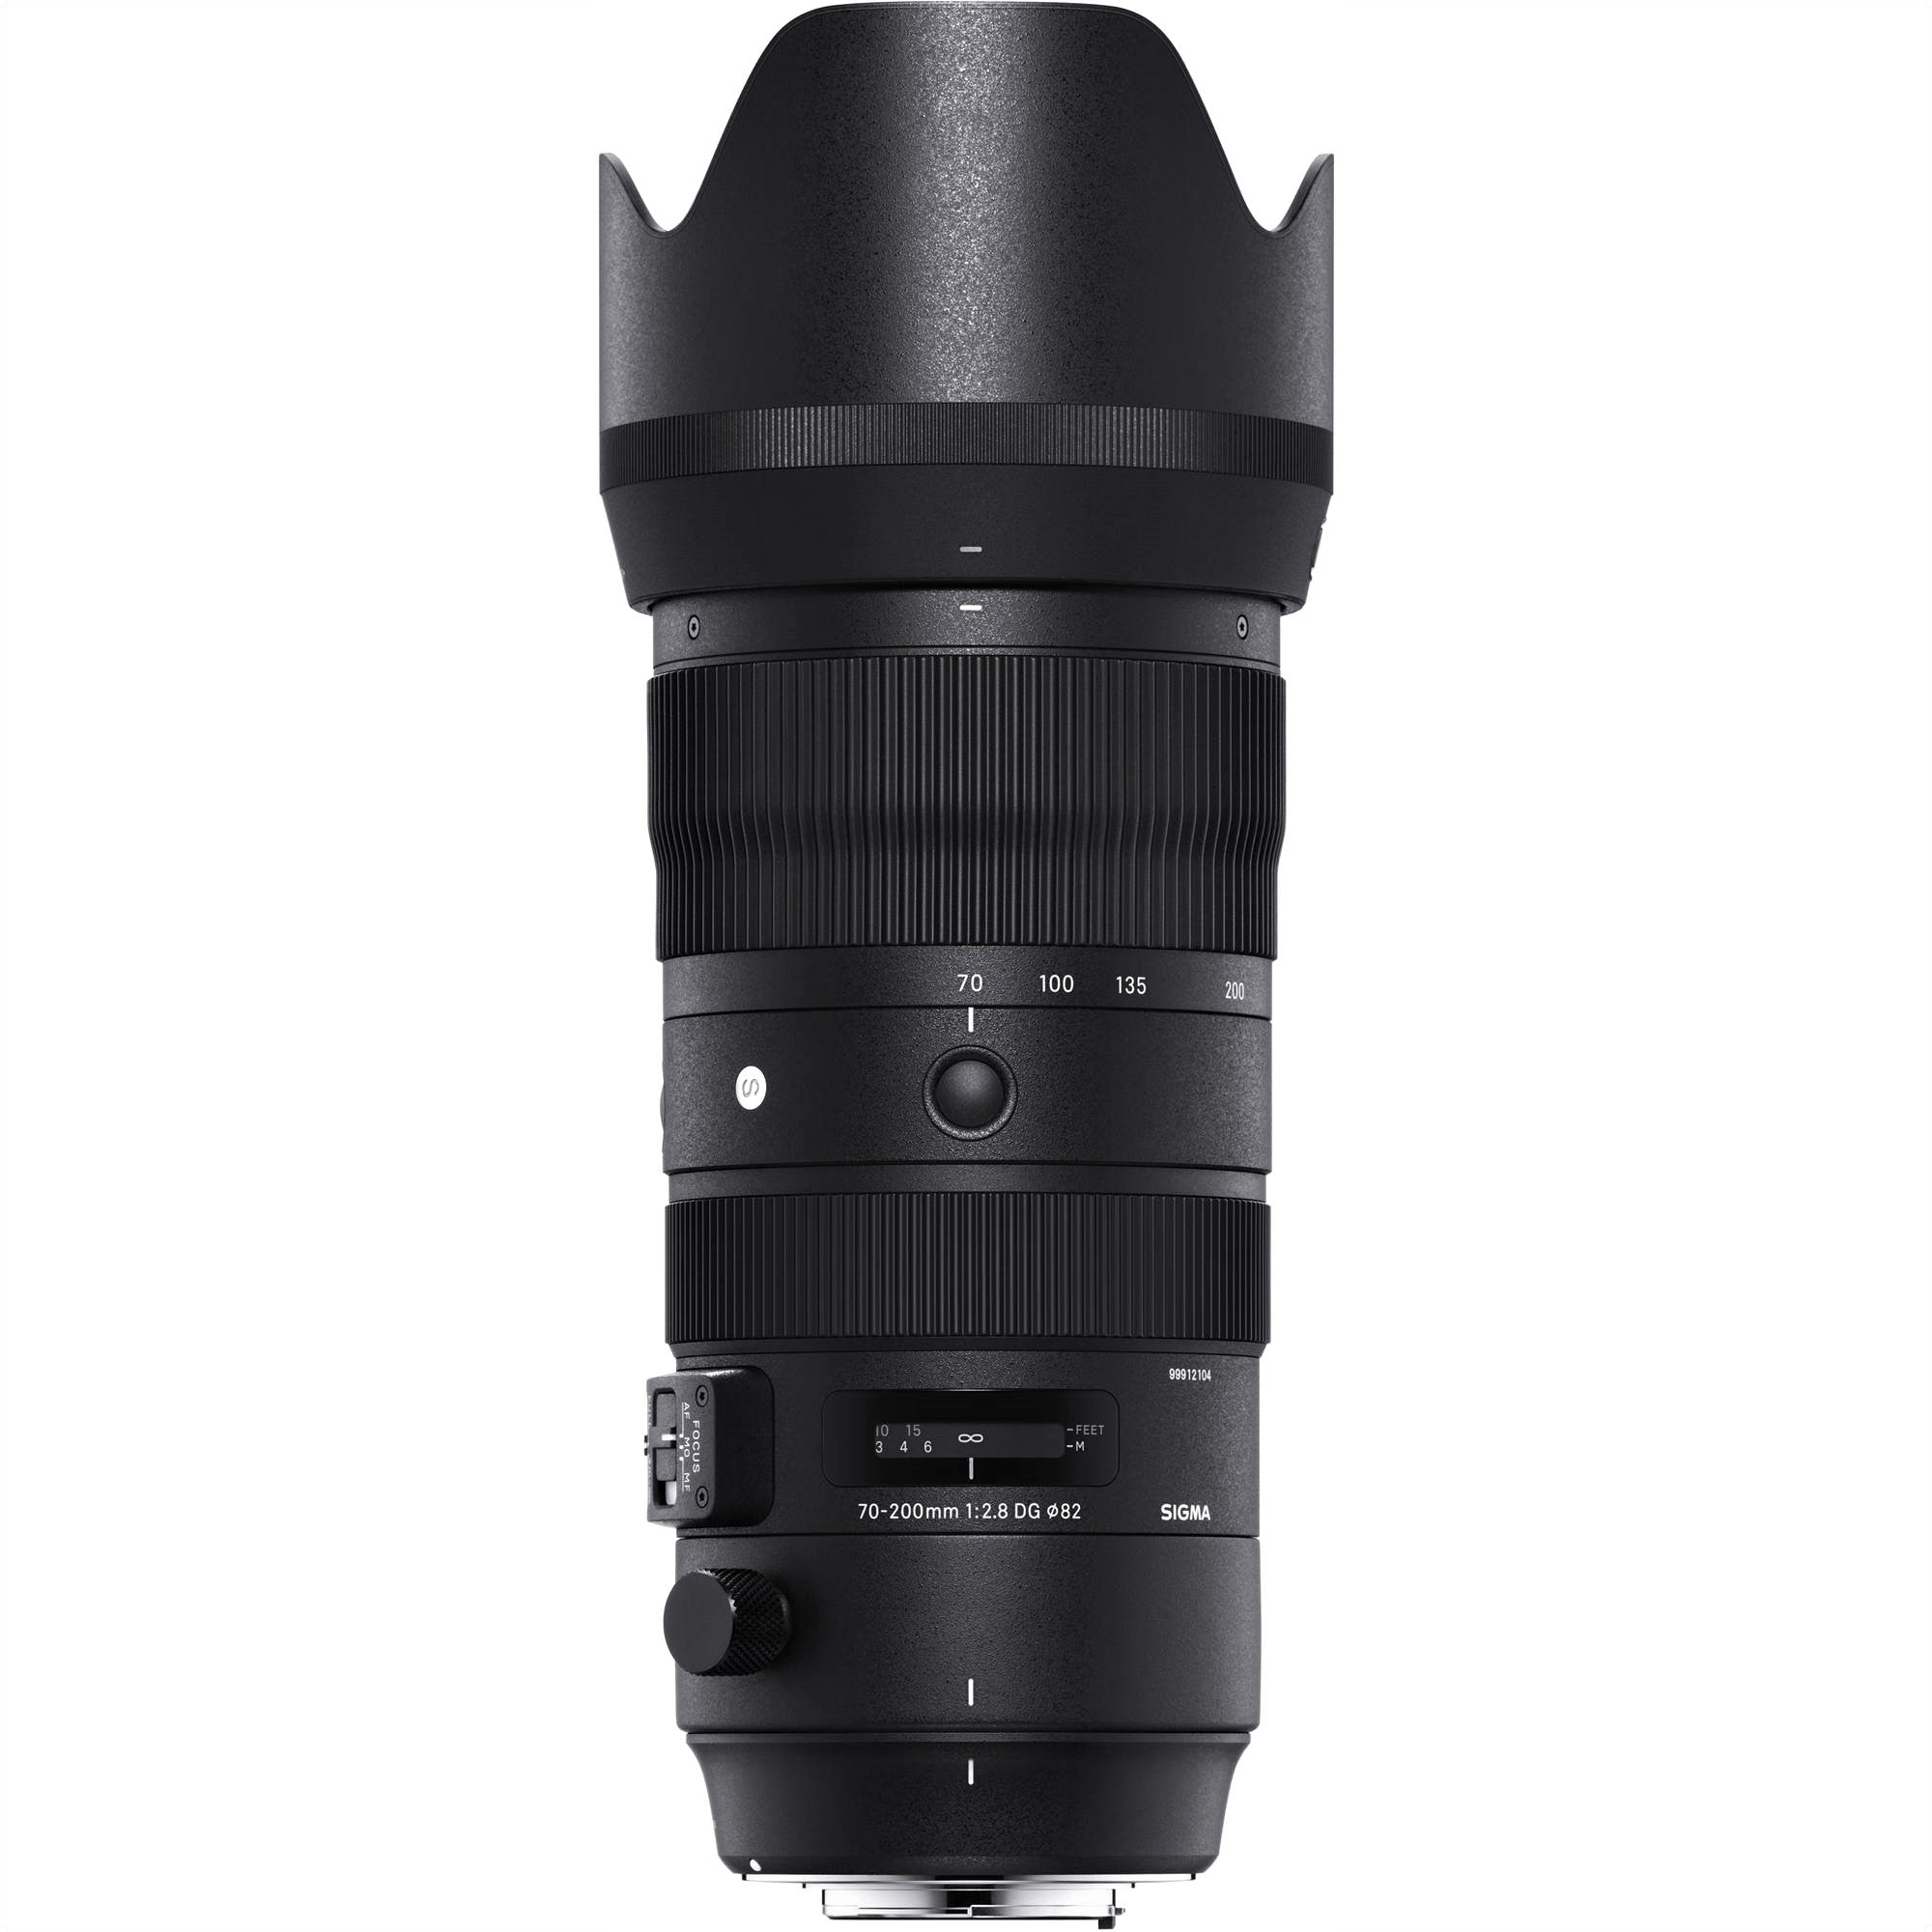 Sigma Lens Hood Attached to 70-200mm F2.8 DG OS HSM Sports Lens